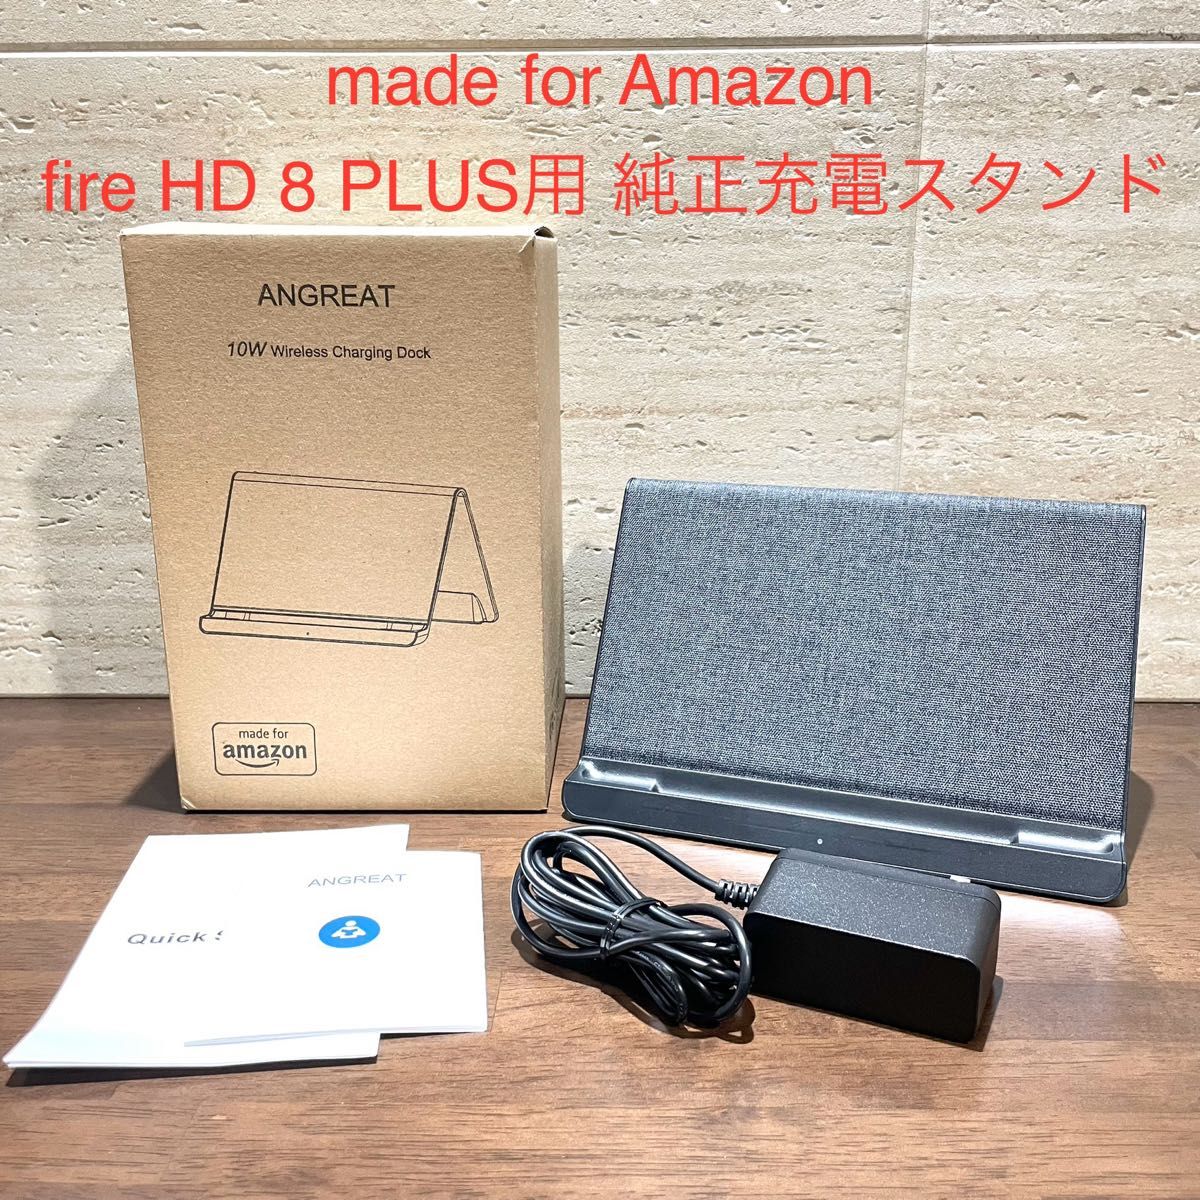 Fire HD 8 Plus 第10世代 & 第12世代用 ワイヤレス充電スタンド Made for Amazon